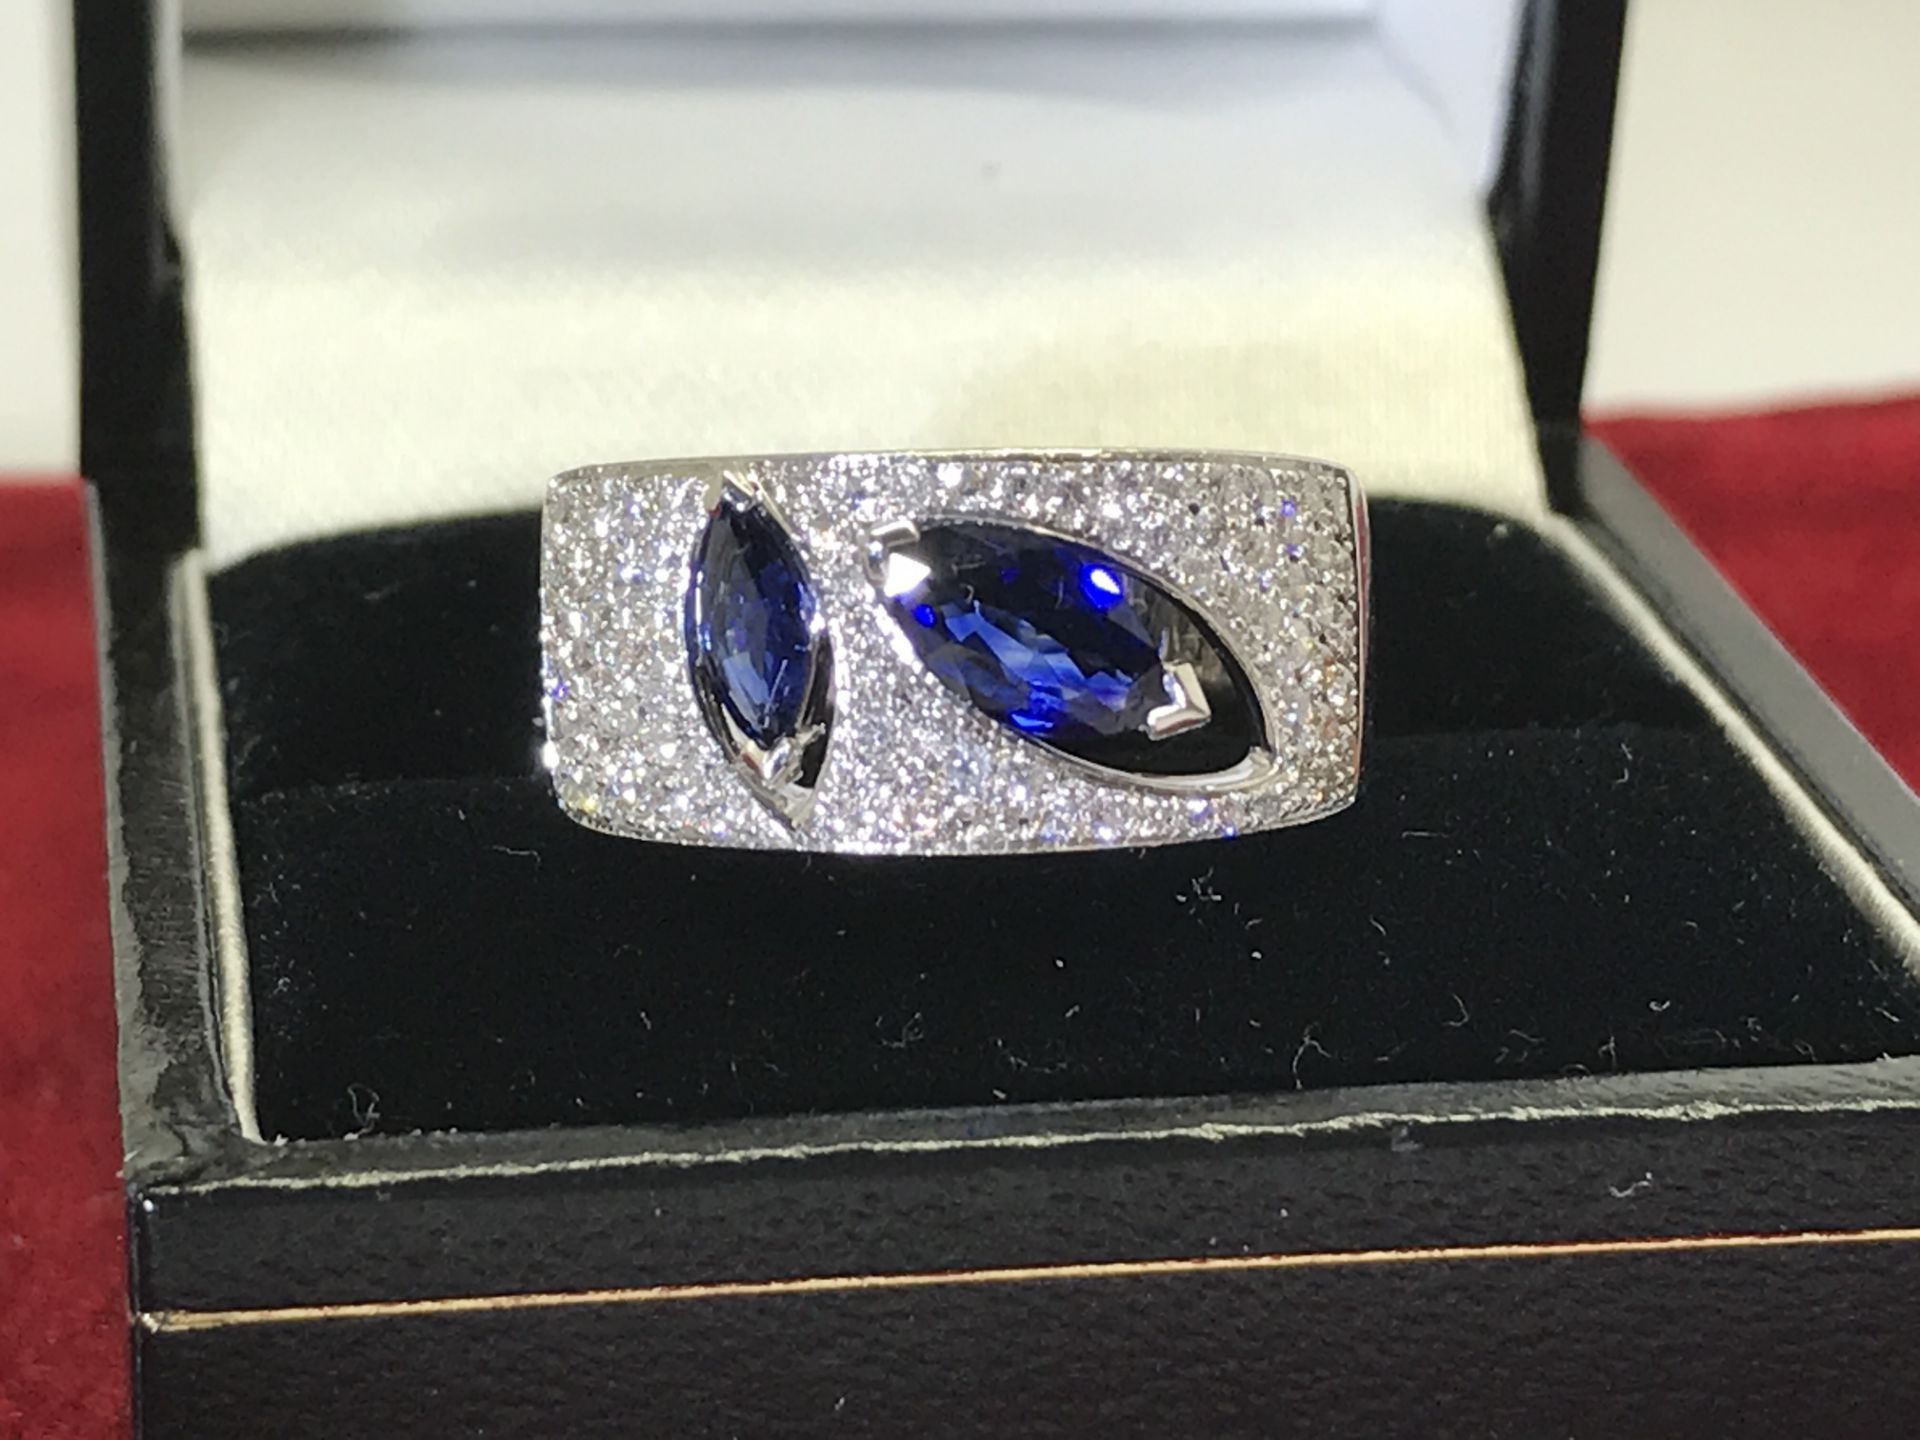 FINE BLUE 1.00ct SAPPHIRE & 1.00ct DIAMOND RING SET IN WHITE METAL MARKED 750 TESTED AS 18ct GOLD